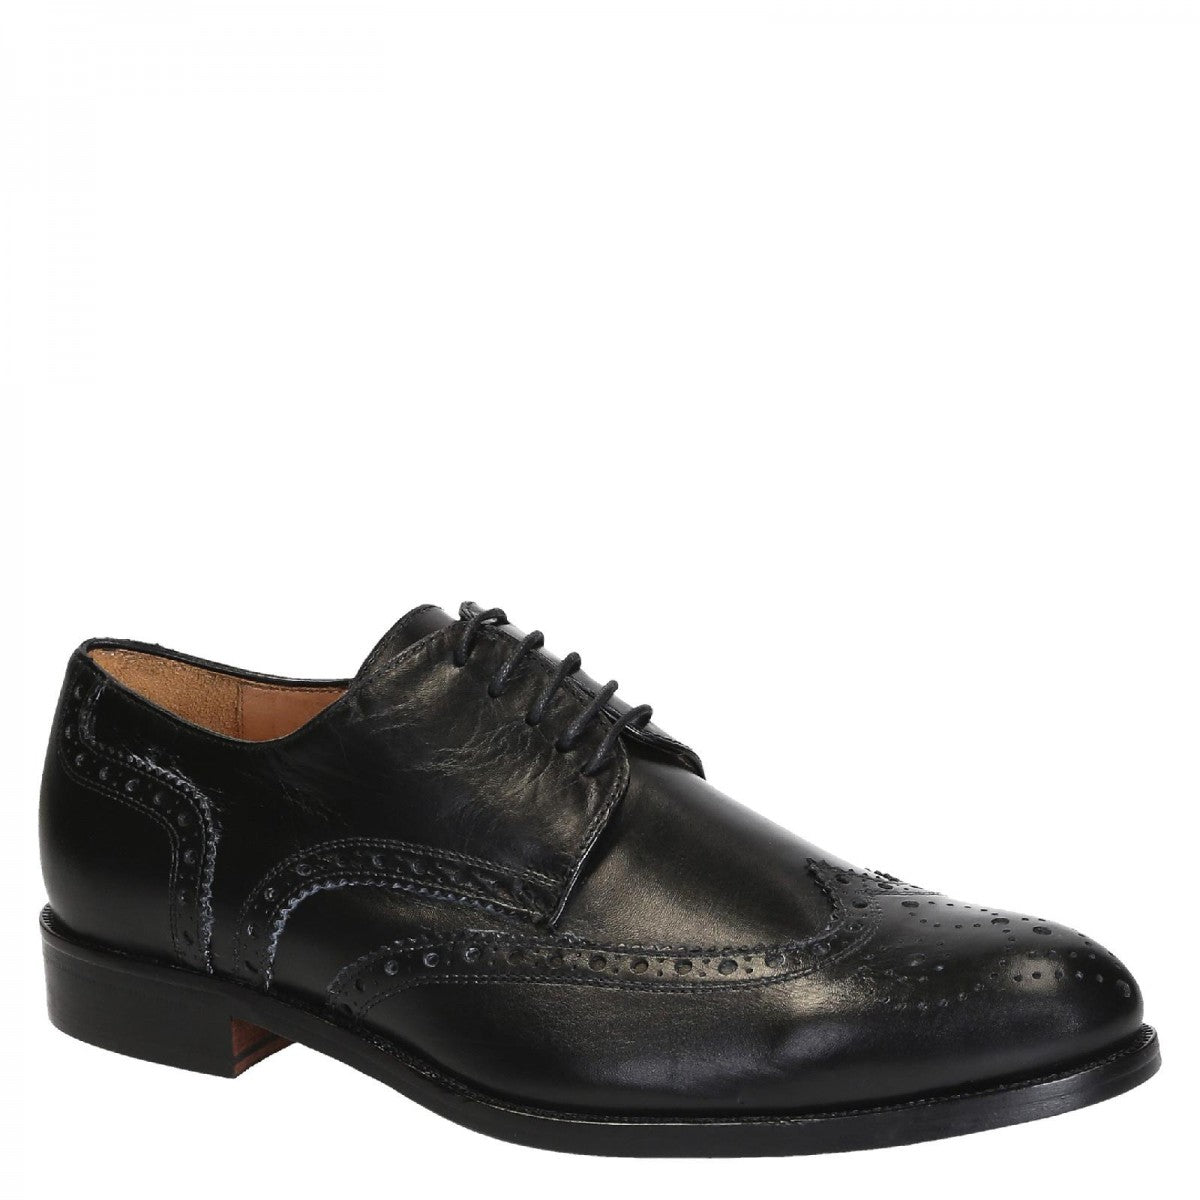 Handmade wingtip brogues derby shoes in black leather